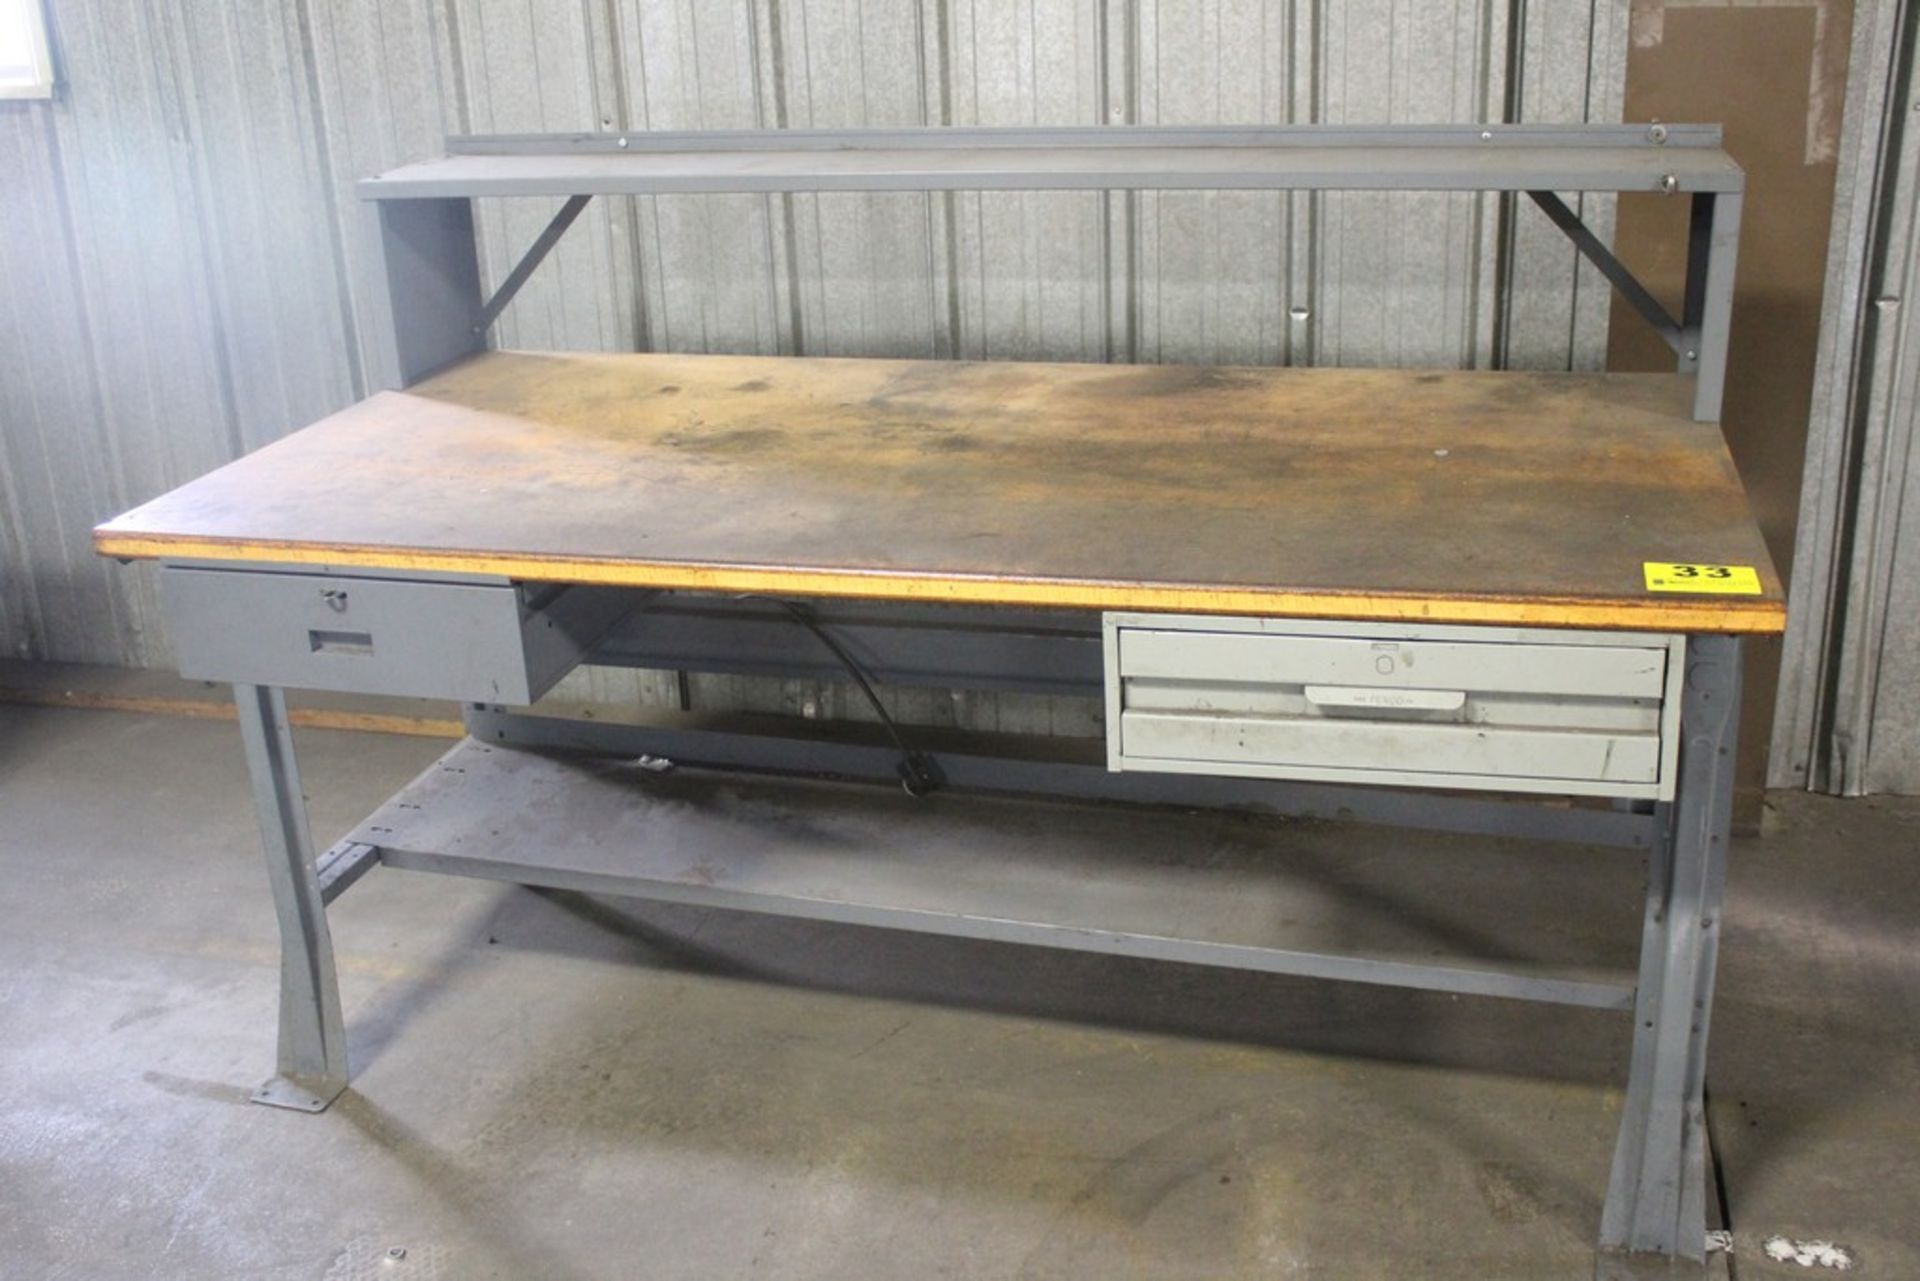 STEEL SHOP TABLE WITH WOOD TOP, TWO DRAWERS AND SHELF, 33" X 72" X 36"